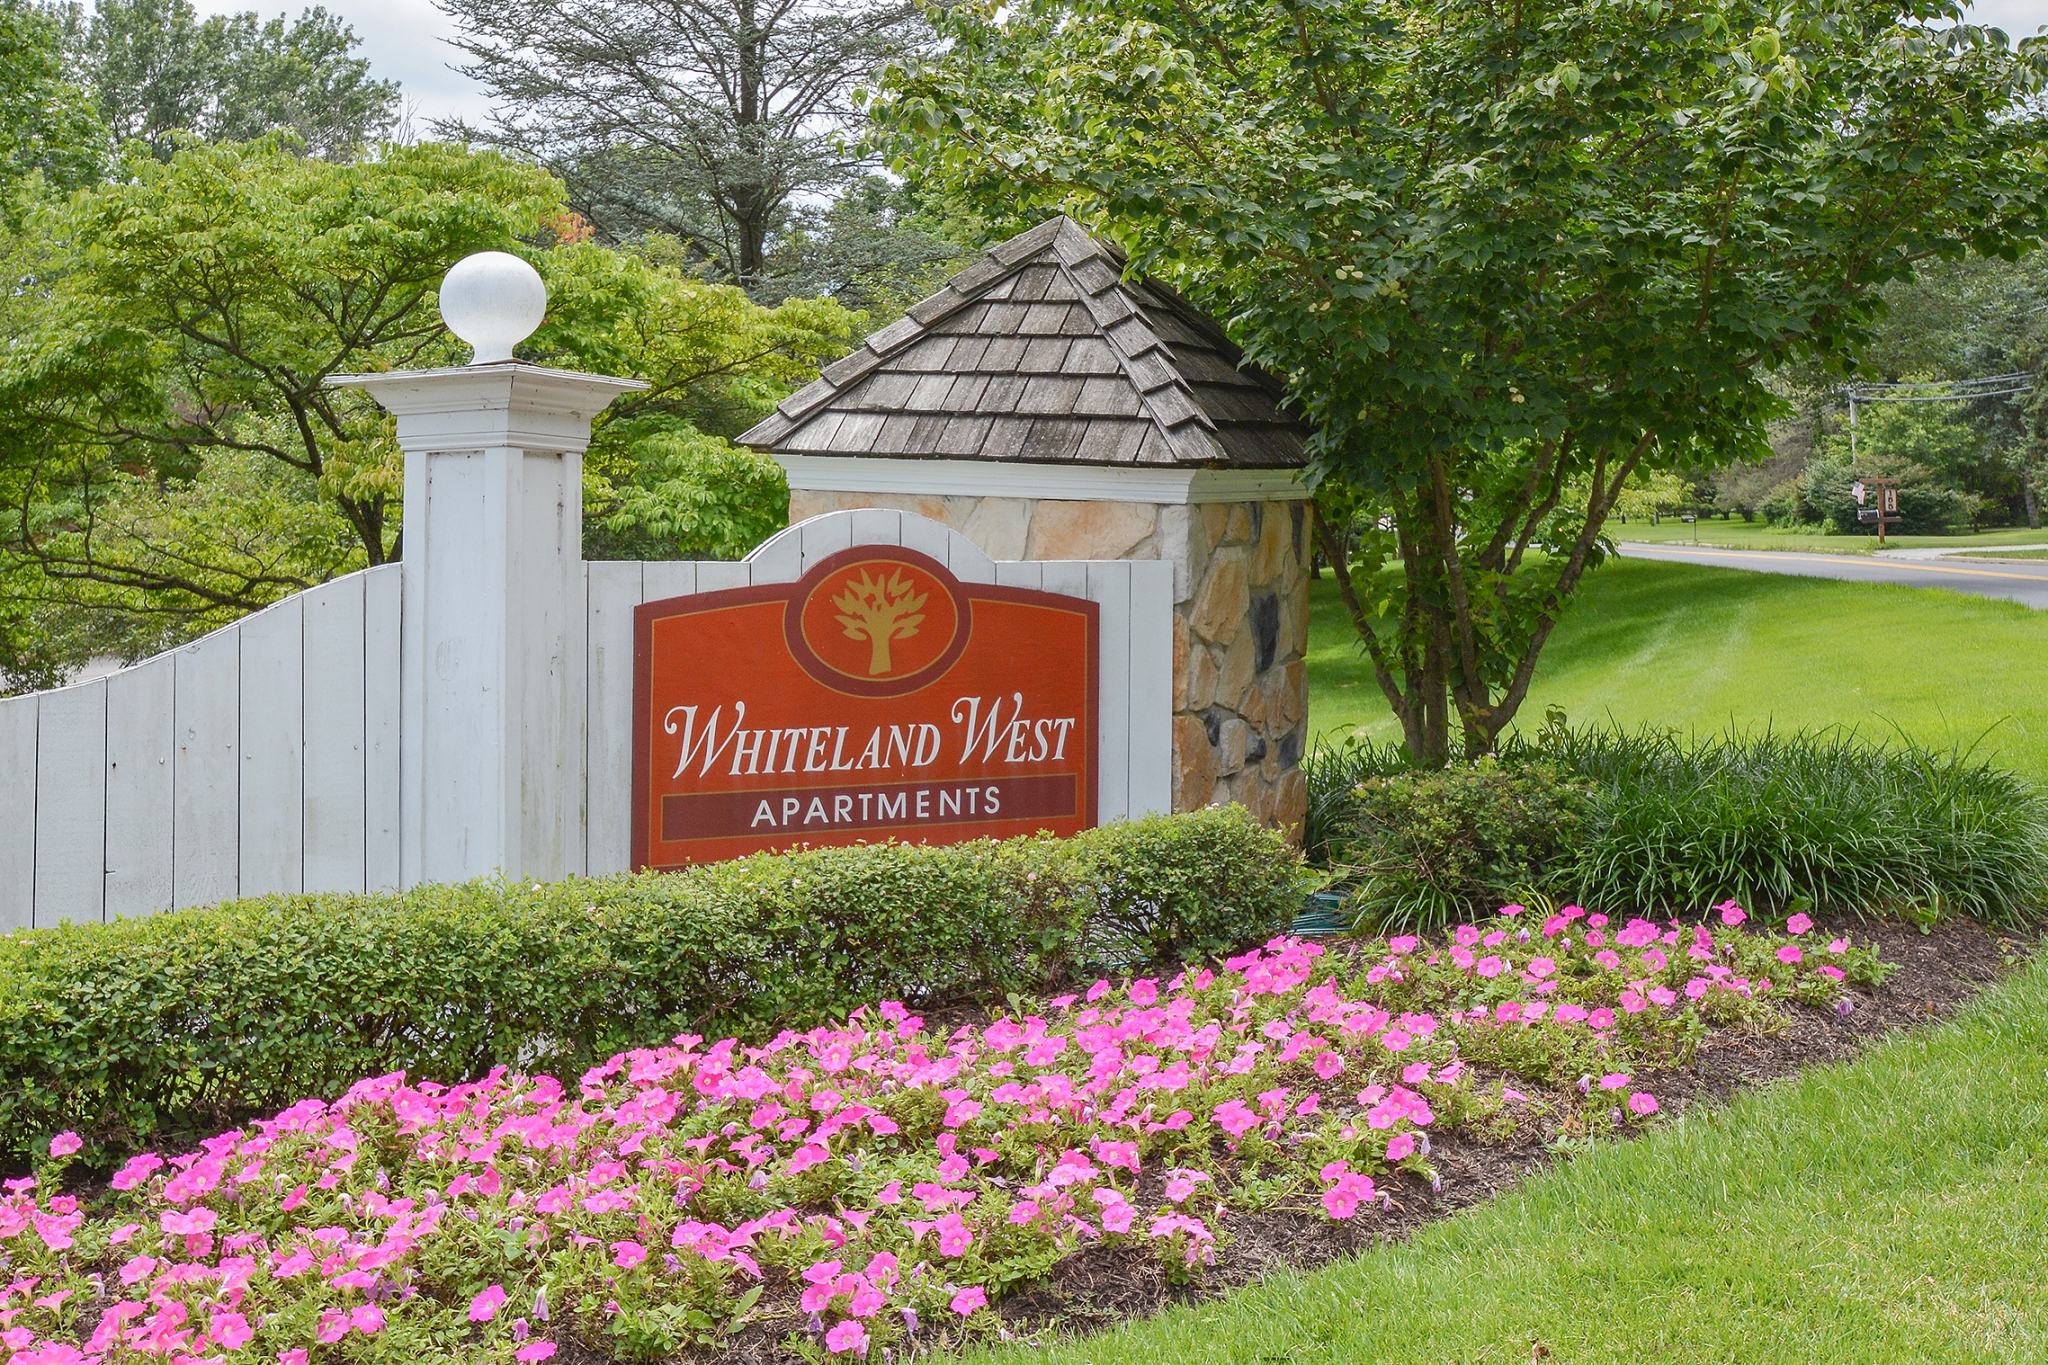 Whiteland West Red Welcome Sign | Apartments near Exton PA